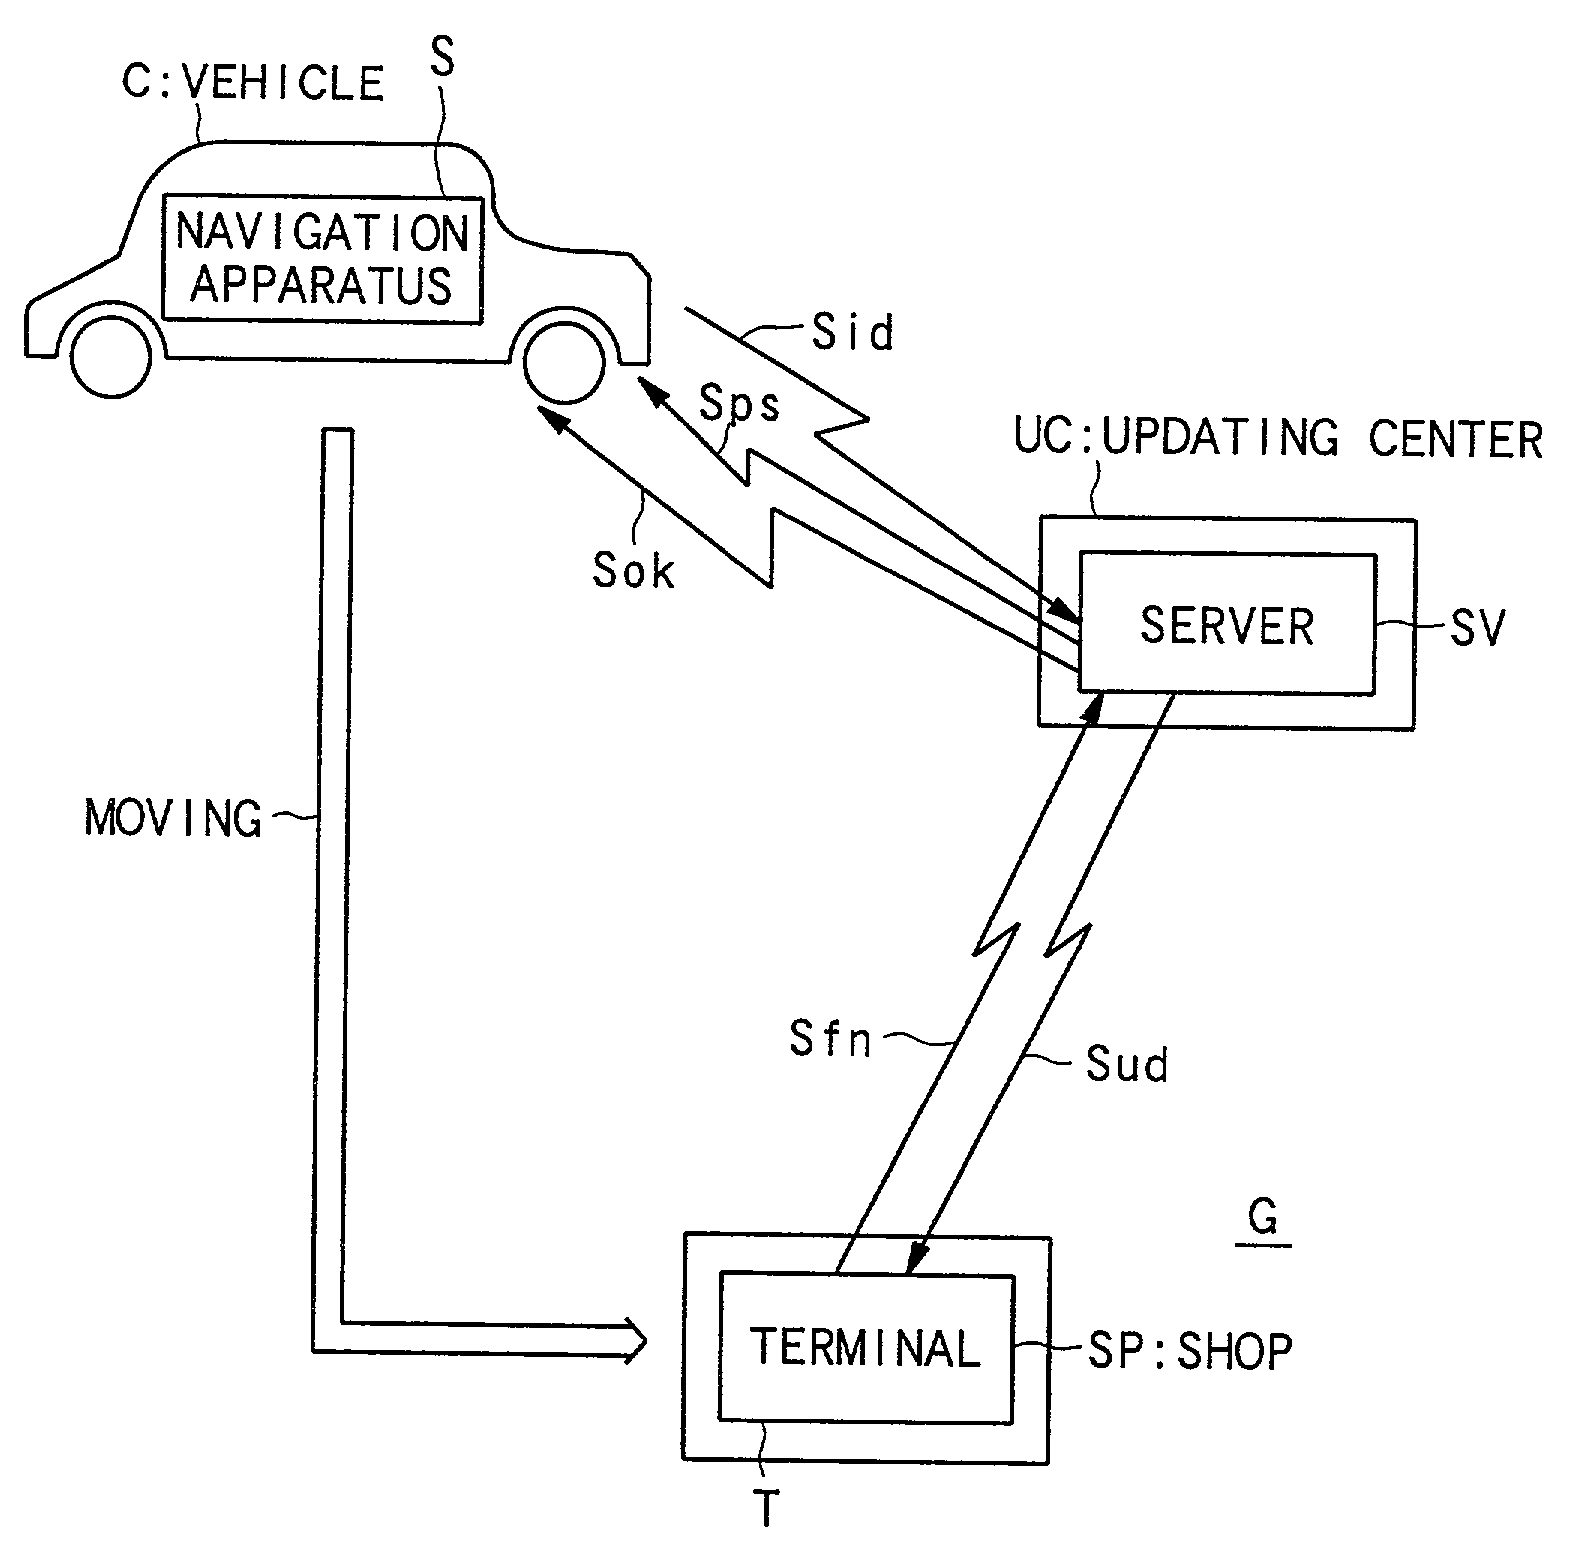 System for updating navigation information and apparatus for distributing updated navigation information